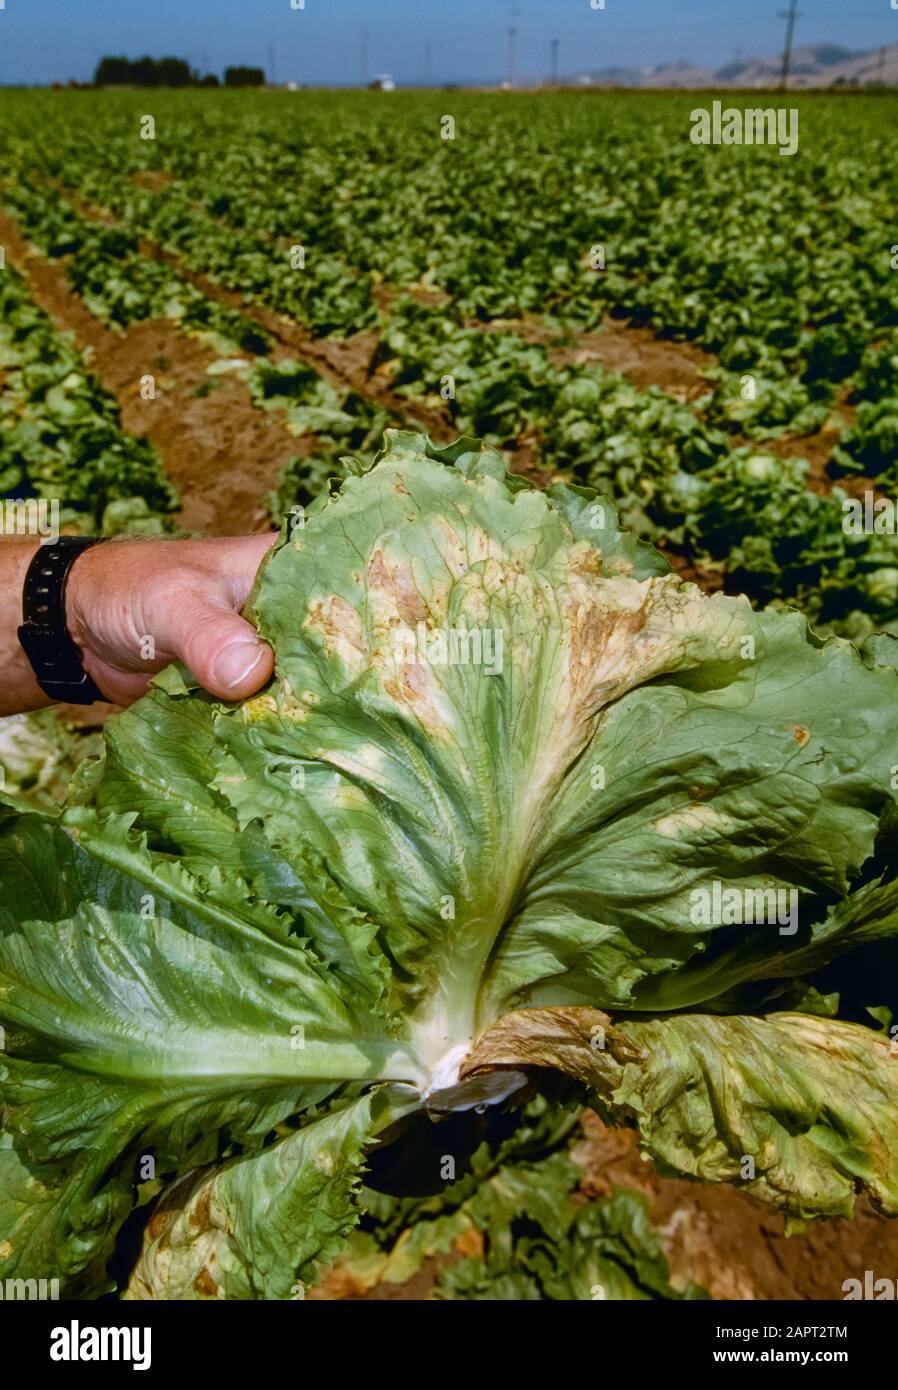 Agriculture - Crop disease, downey mildew on a head of Iceberg lettuce / Salinas Valley, California, USA. Stock Photo